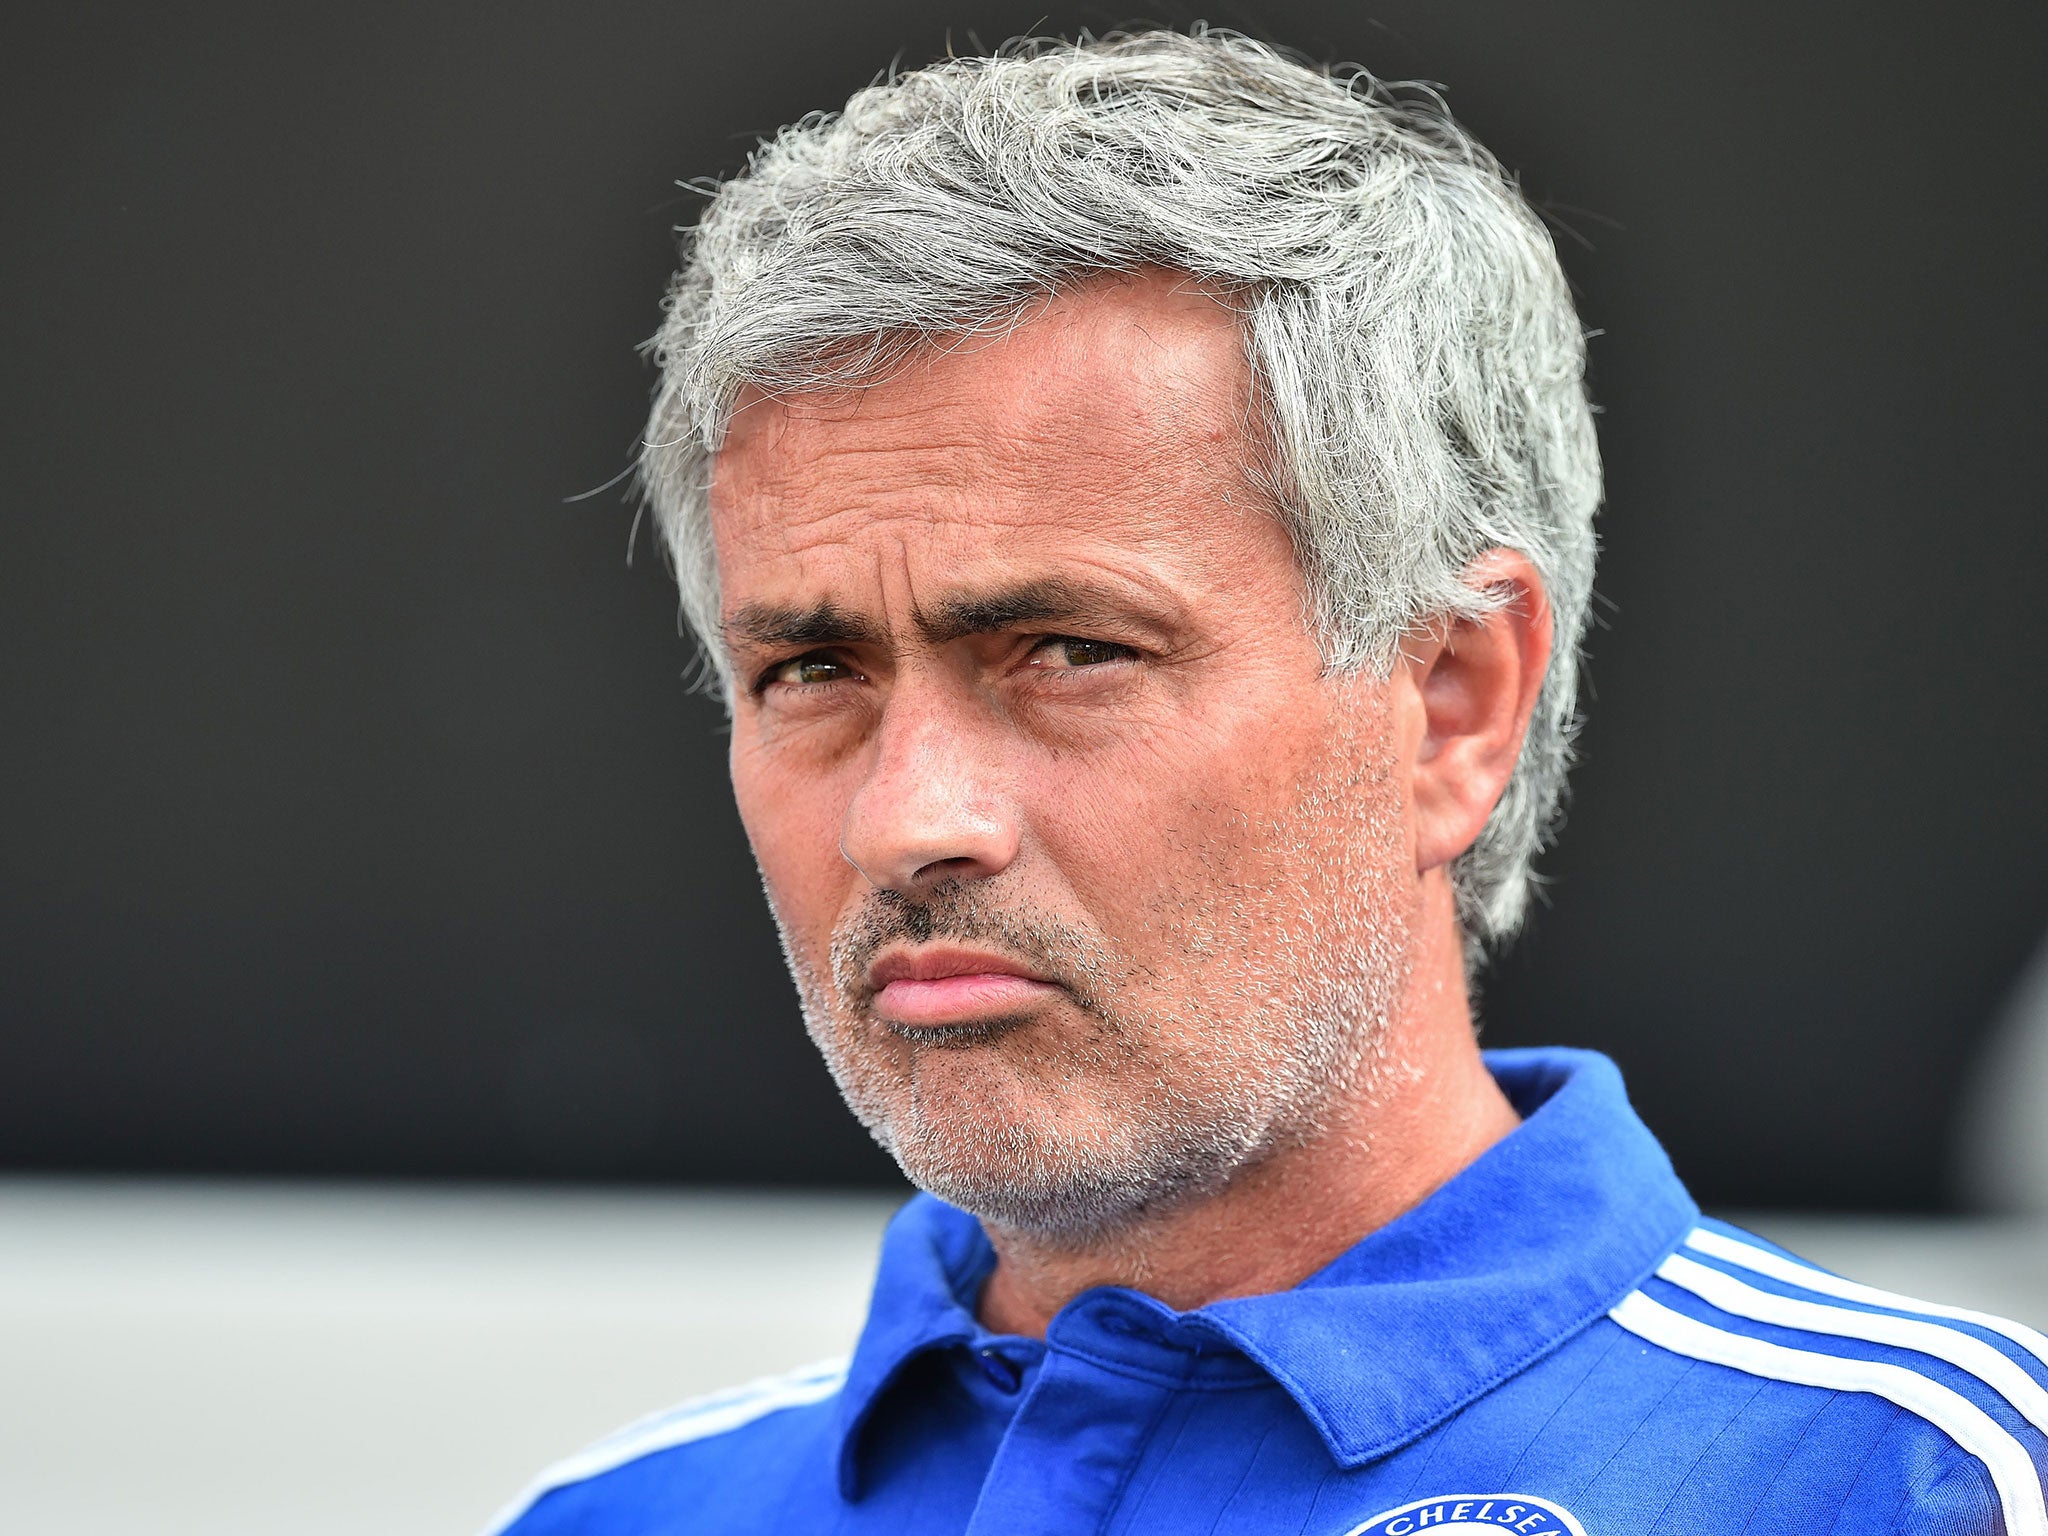 Chelsea manager Jose Mourinho accused Manchester United and Liverpool of 'trying to buy the title'